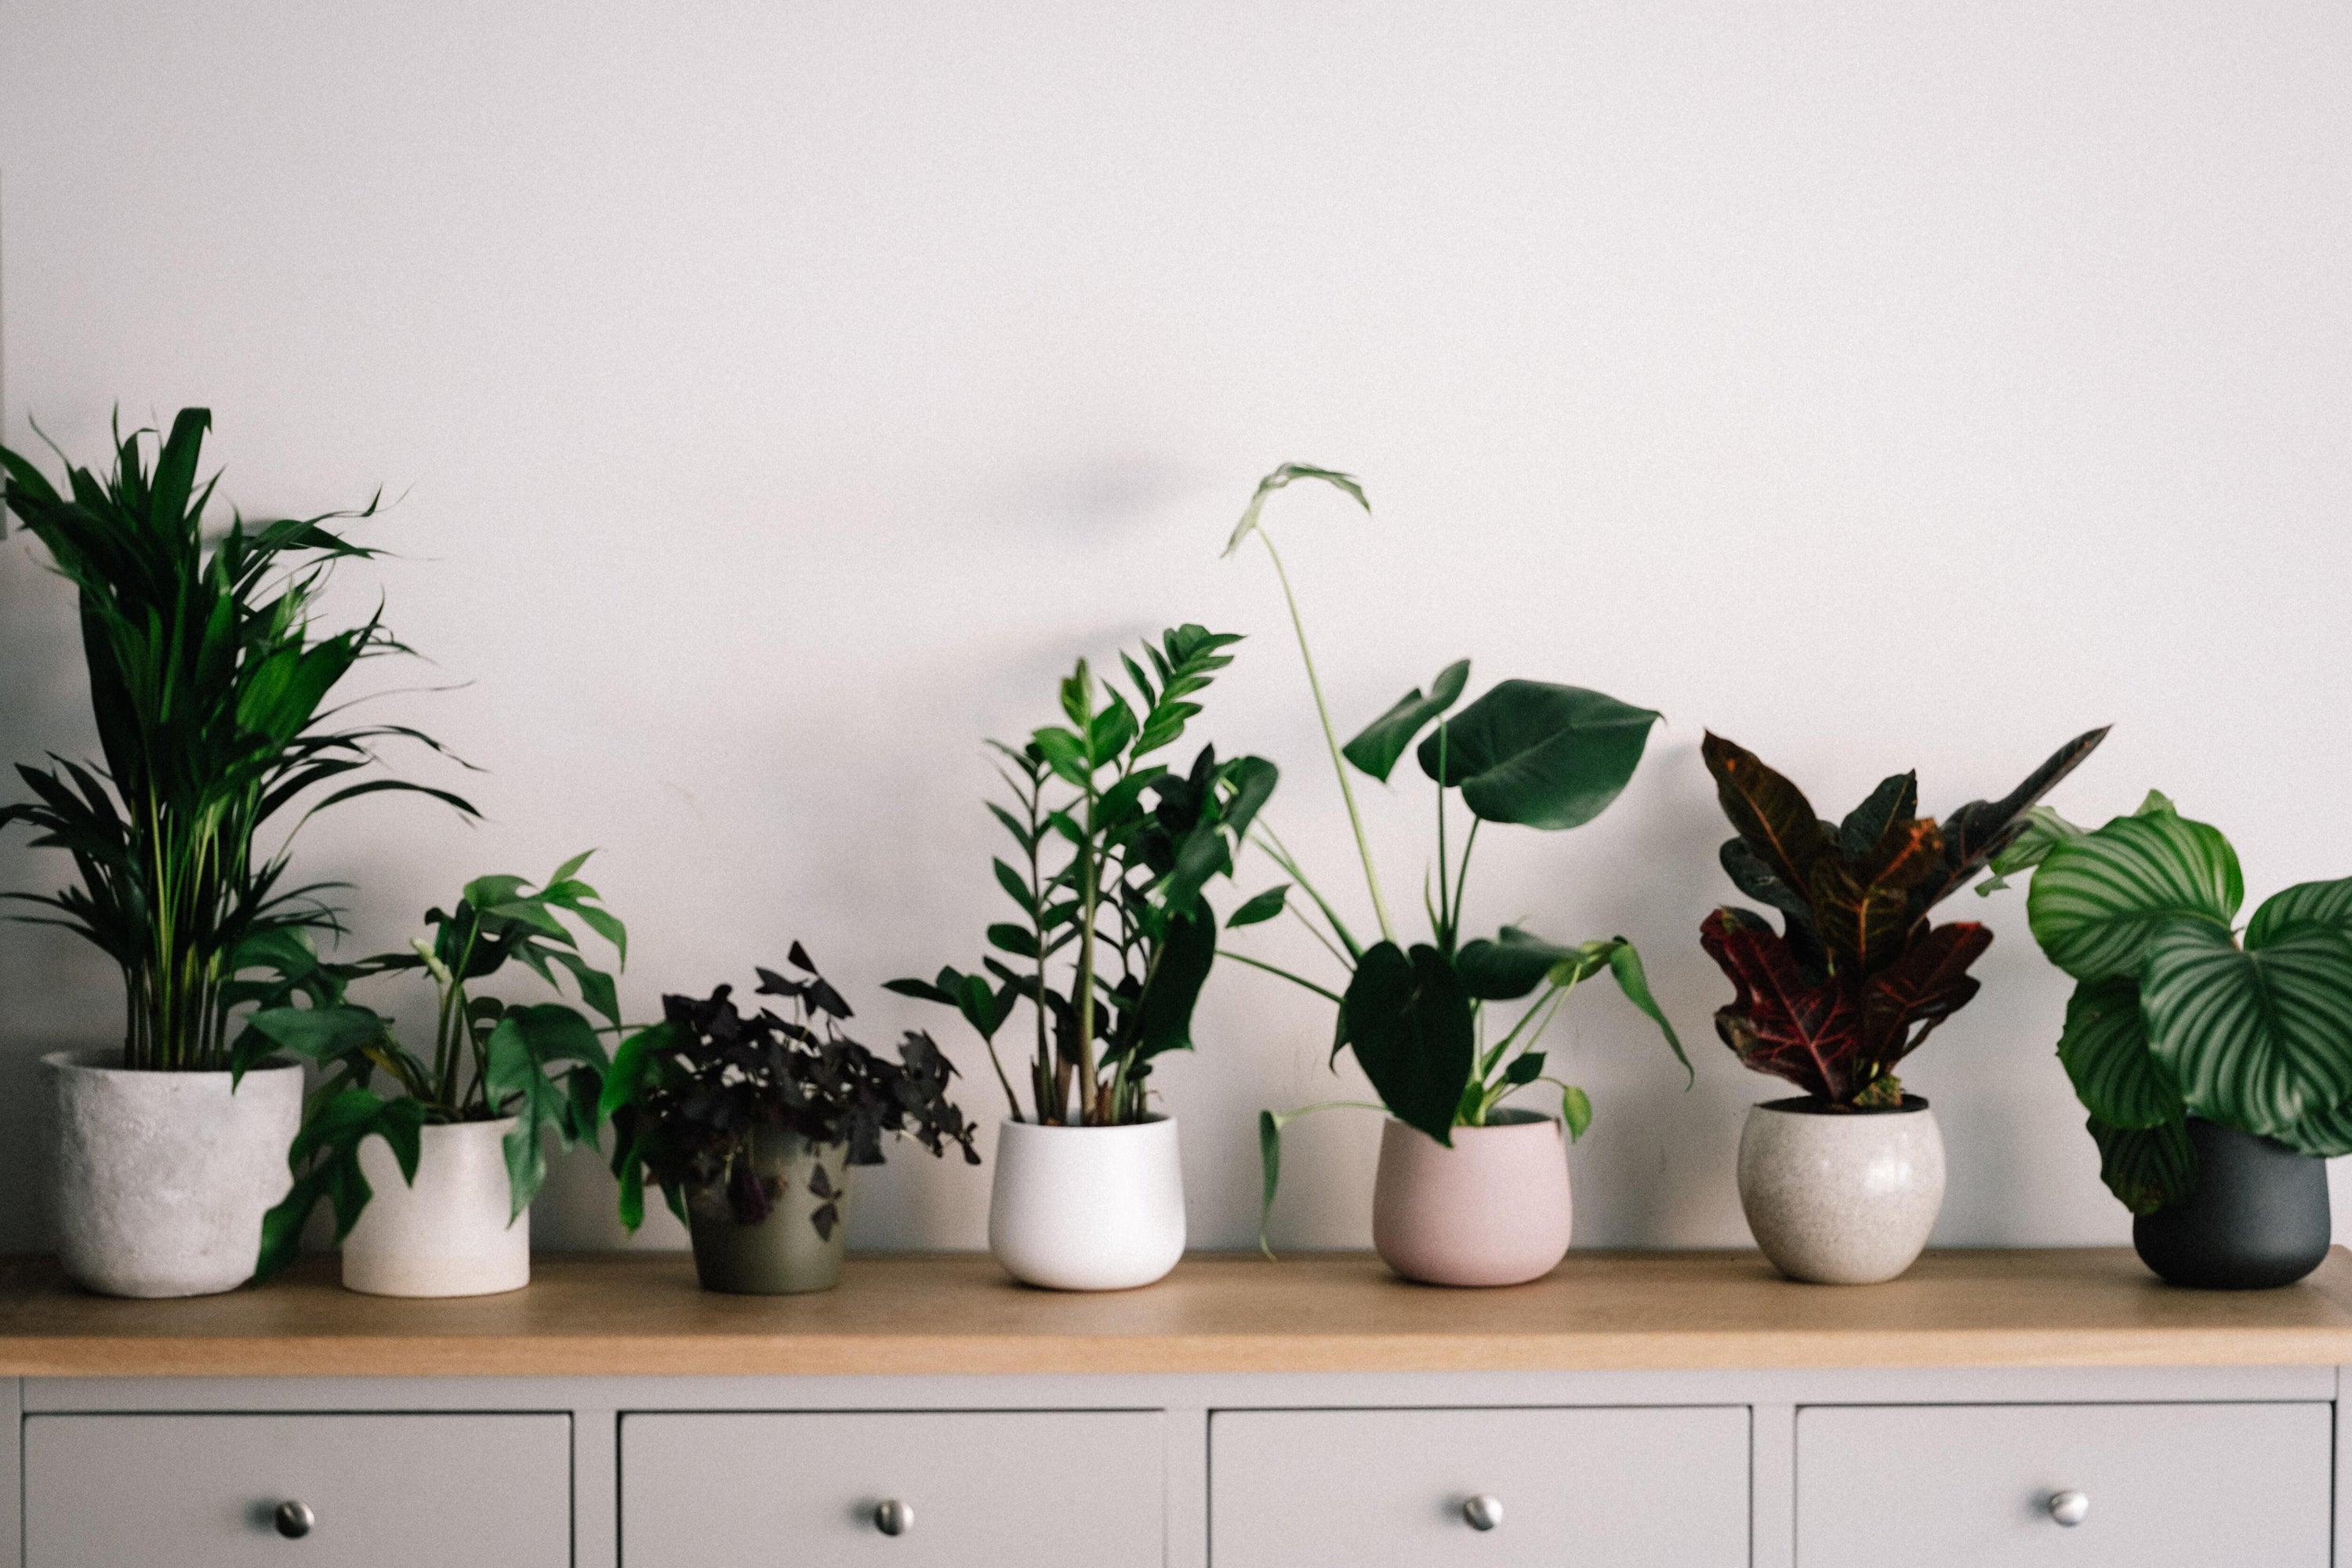 Low-Maintenance House Plants: The Easiest Plants to Keep Indoors